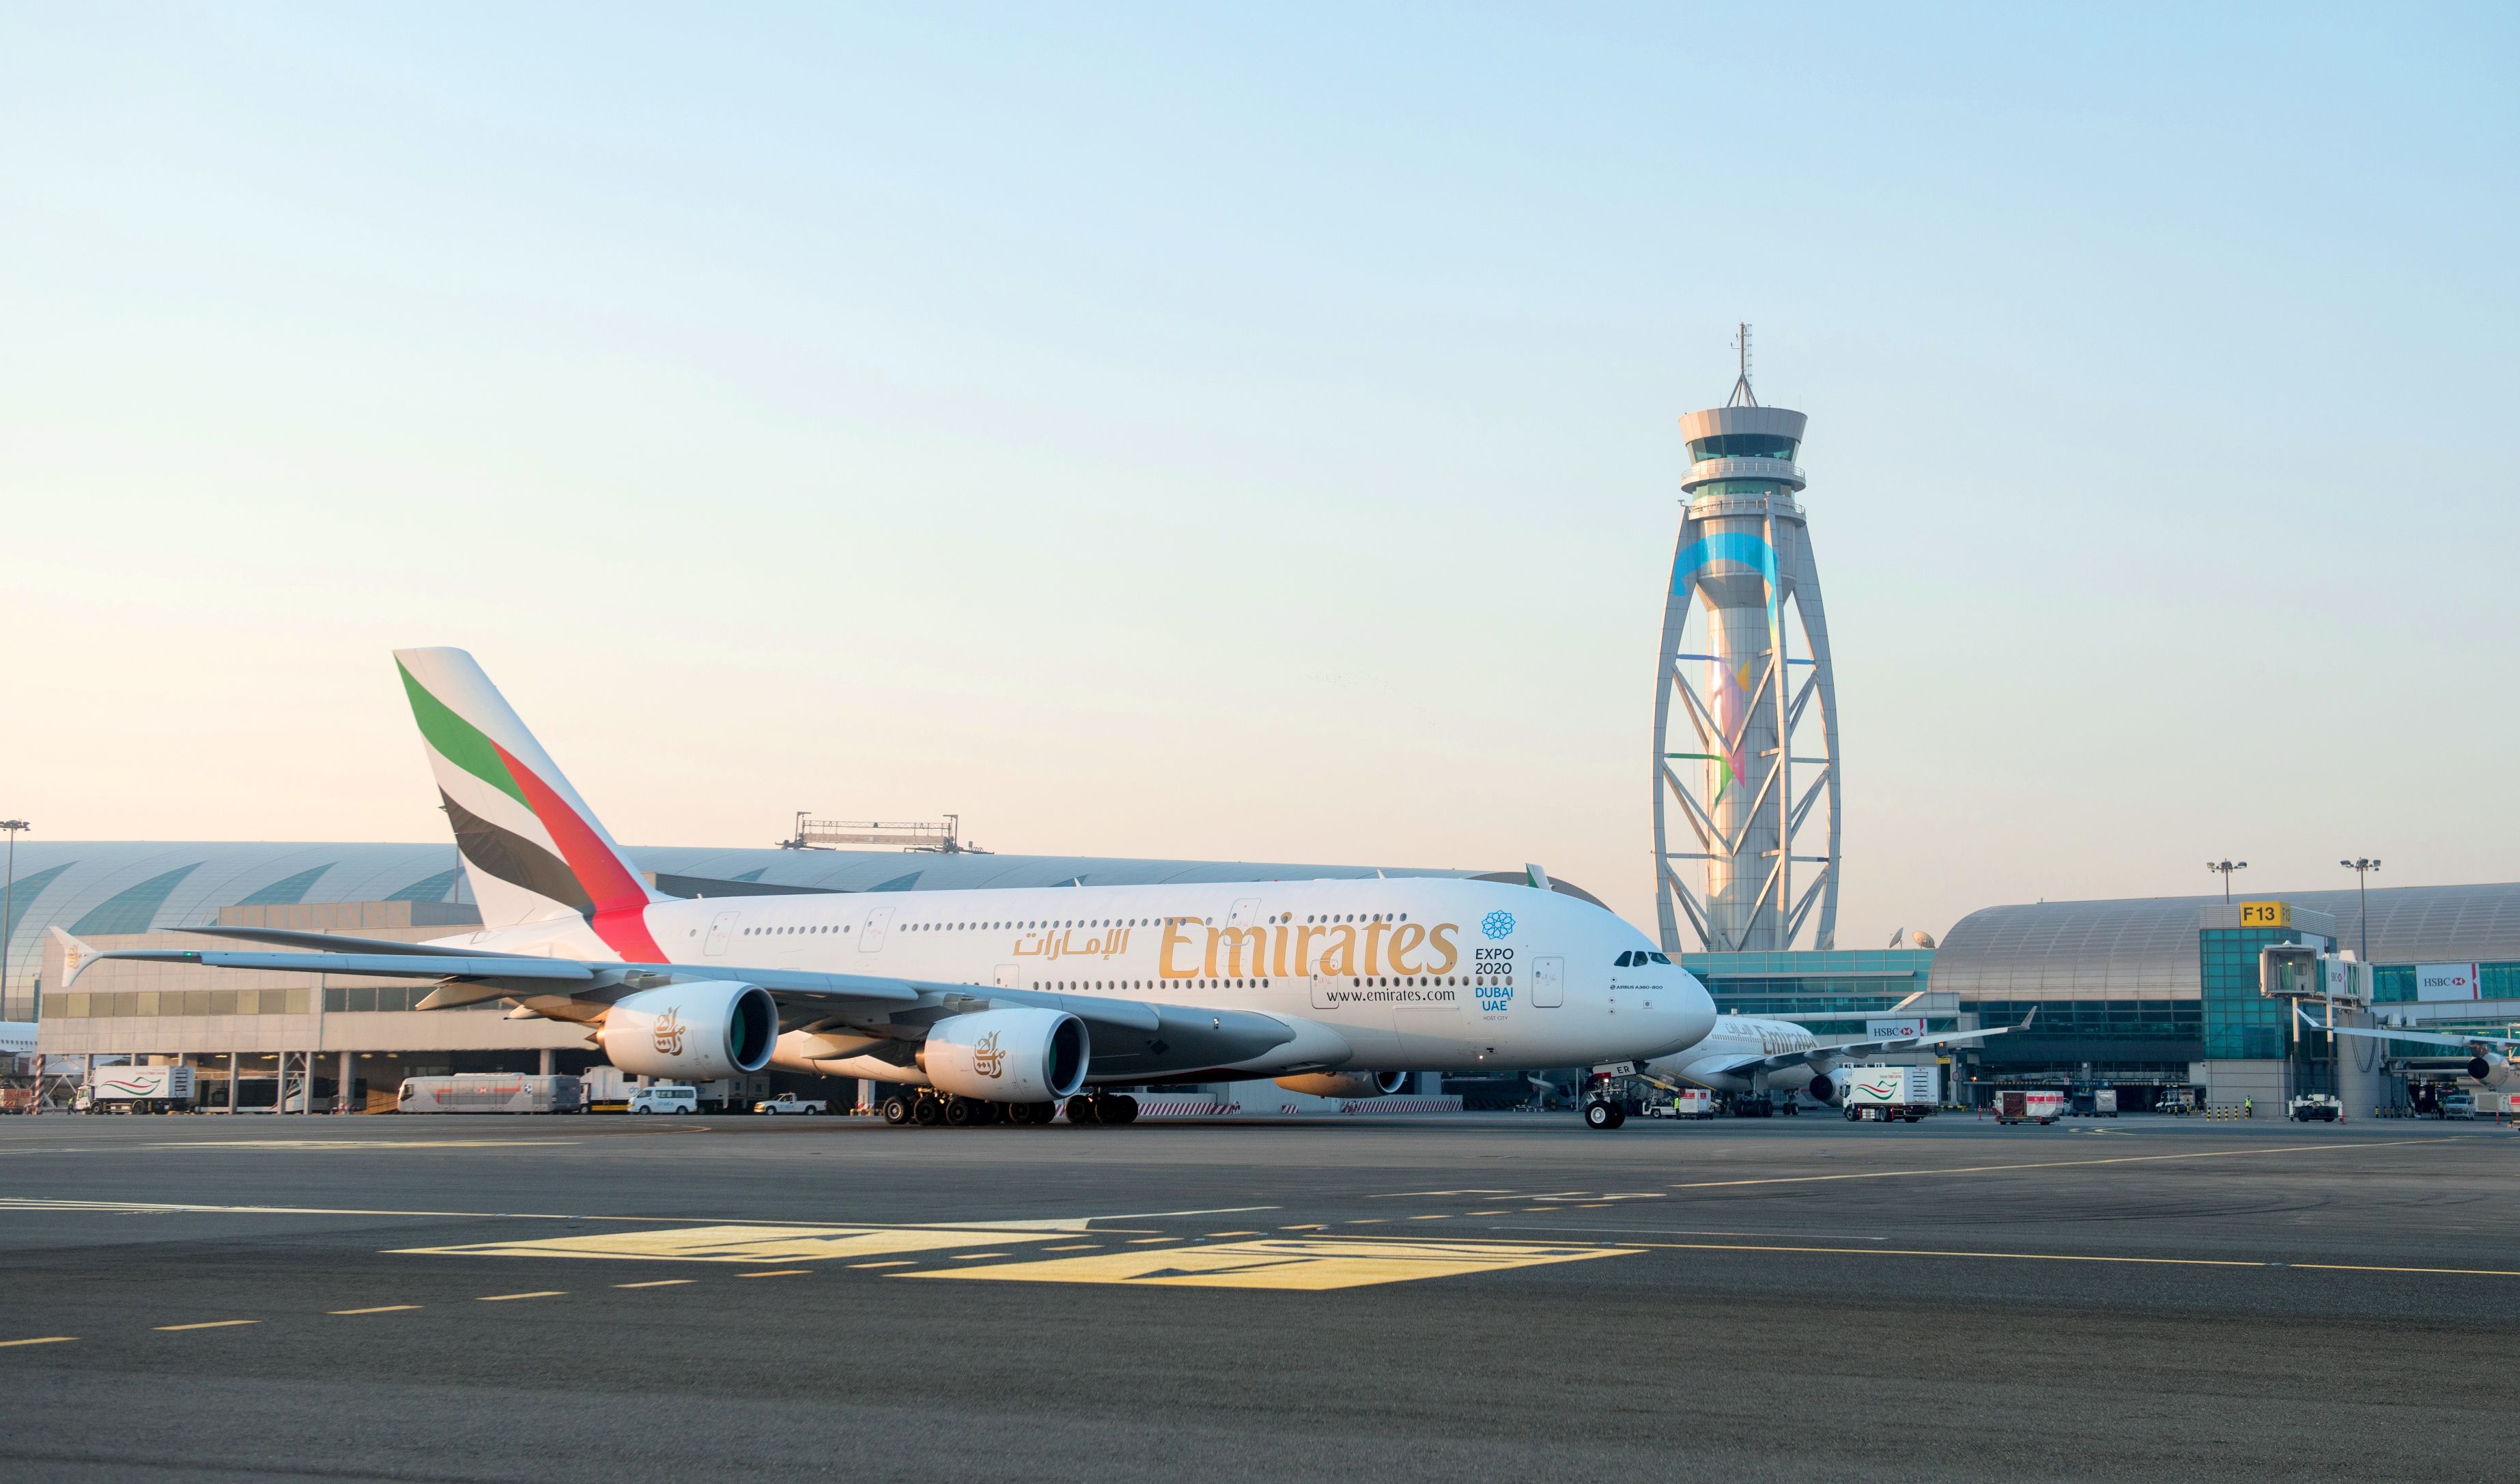 An Emirates Airbus A380 on the apron in front of the Dubai International Airport ATC tower.